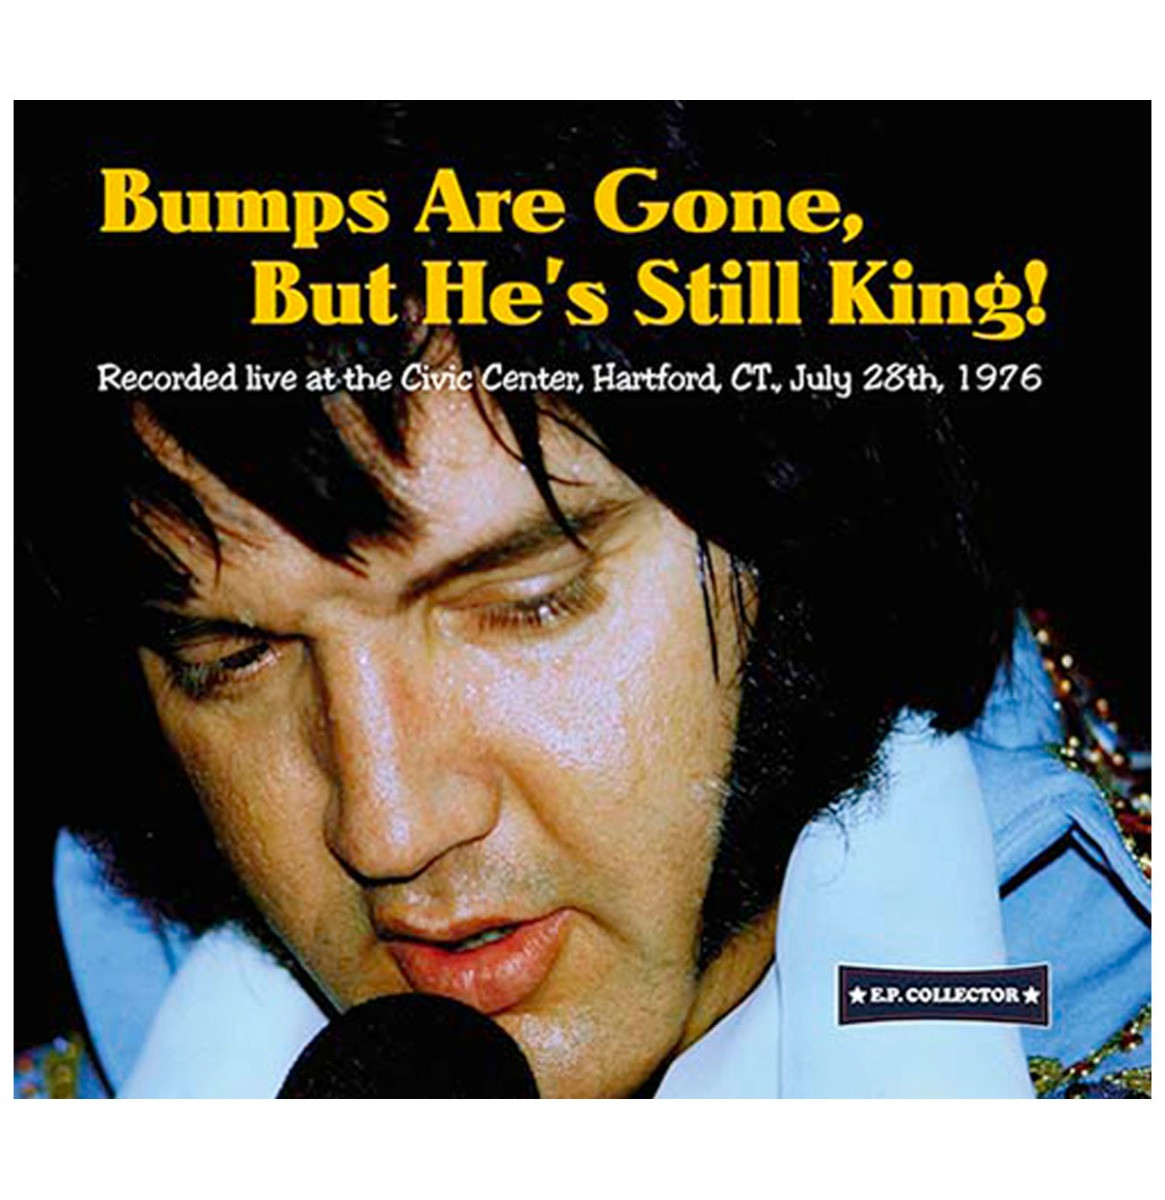 Elvis Presley - Bumps Are Gone, But He&apos;s Still King! Hartford CT, July 28th, 1976 CD